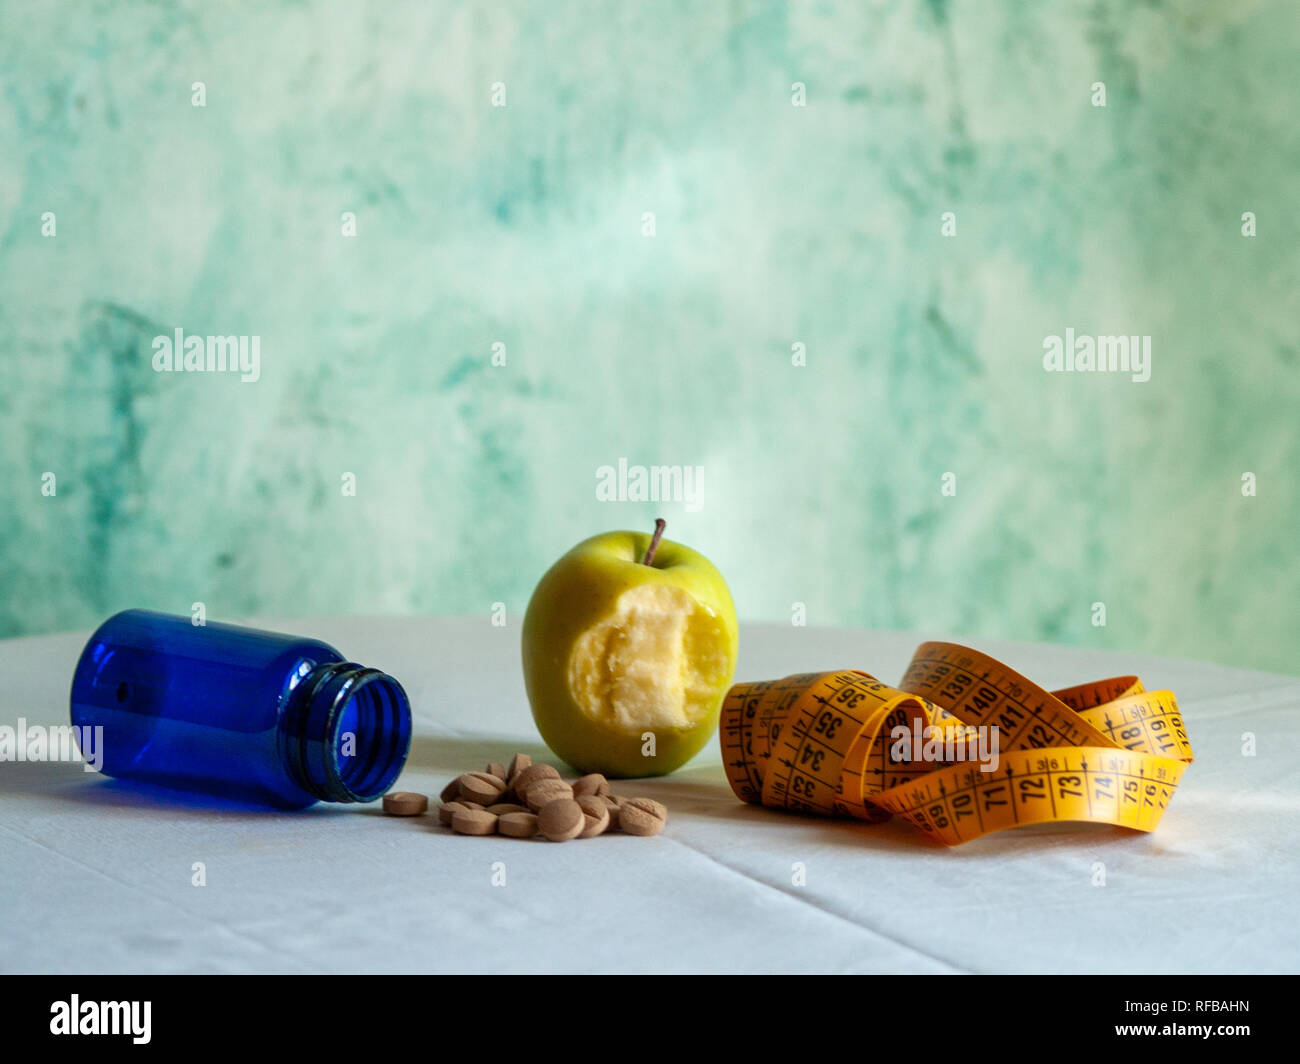 A bitten apple, a tape measure and a blue container with vegetable fiber pills on a table Stock Photo